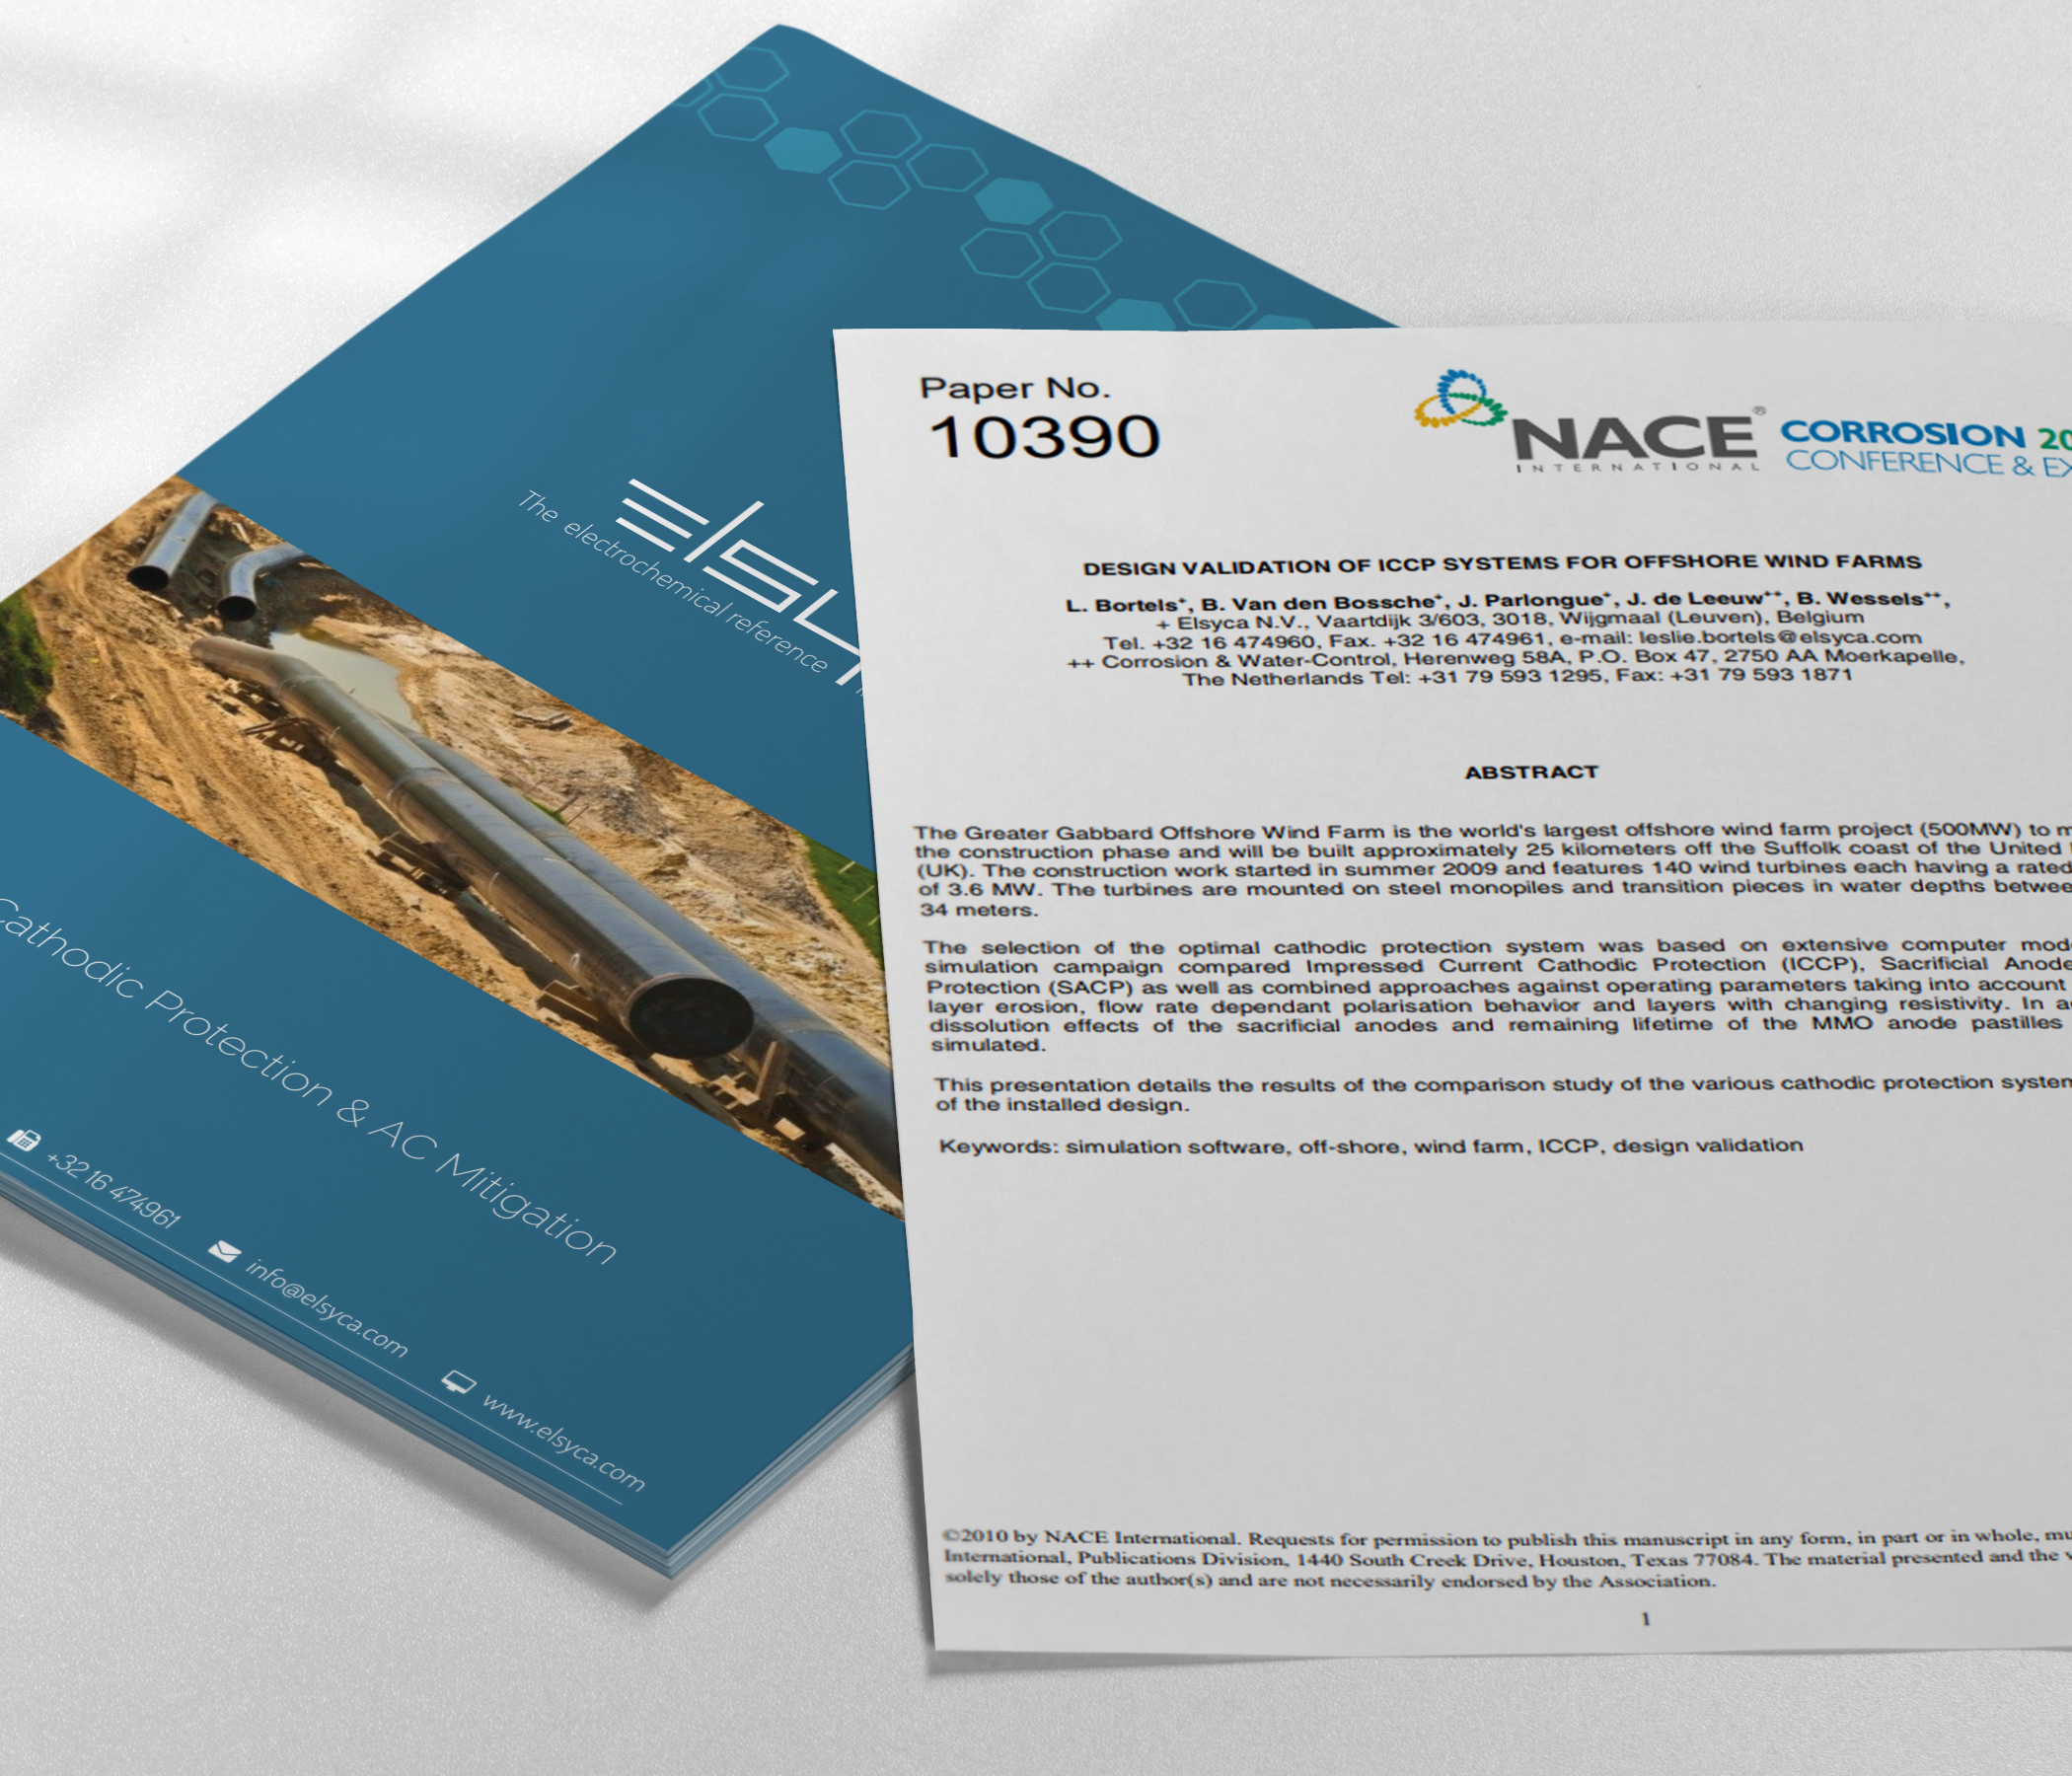 ICCP Design of the Greater Gabbard Offshore Wind Farm (NACE Corrosion, 2010)